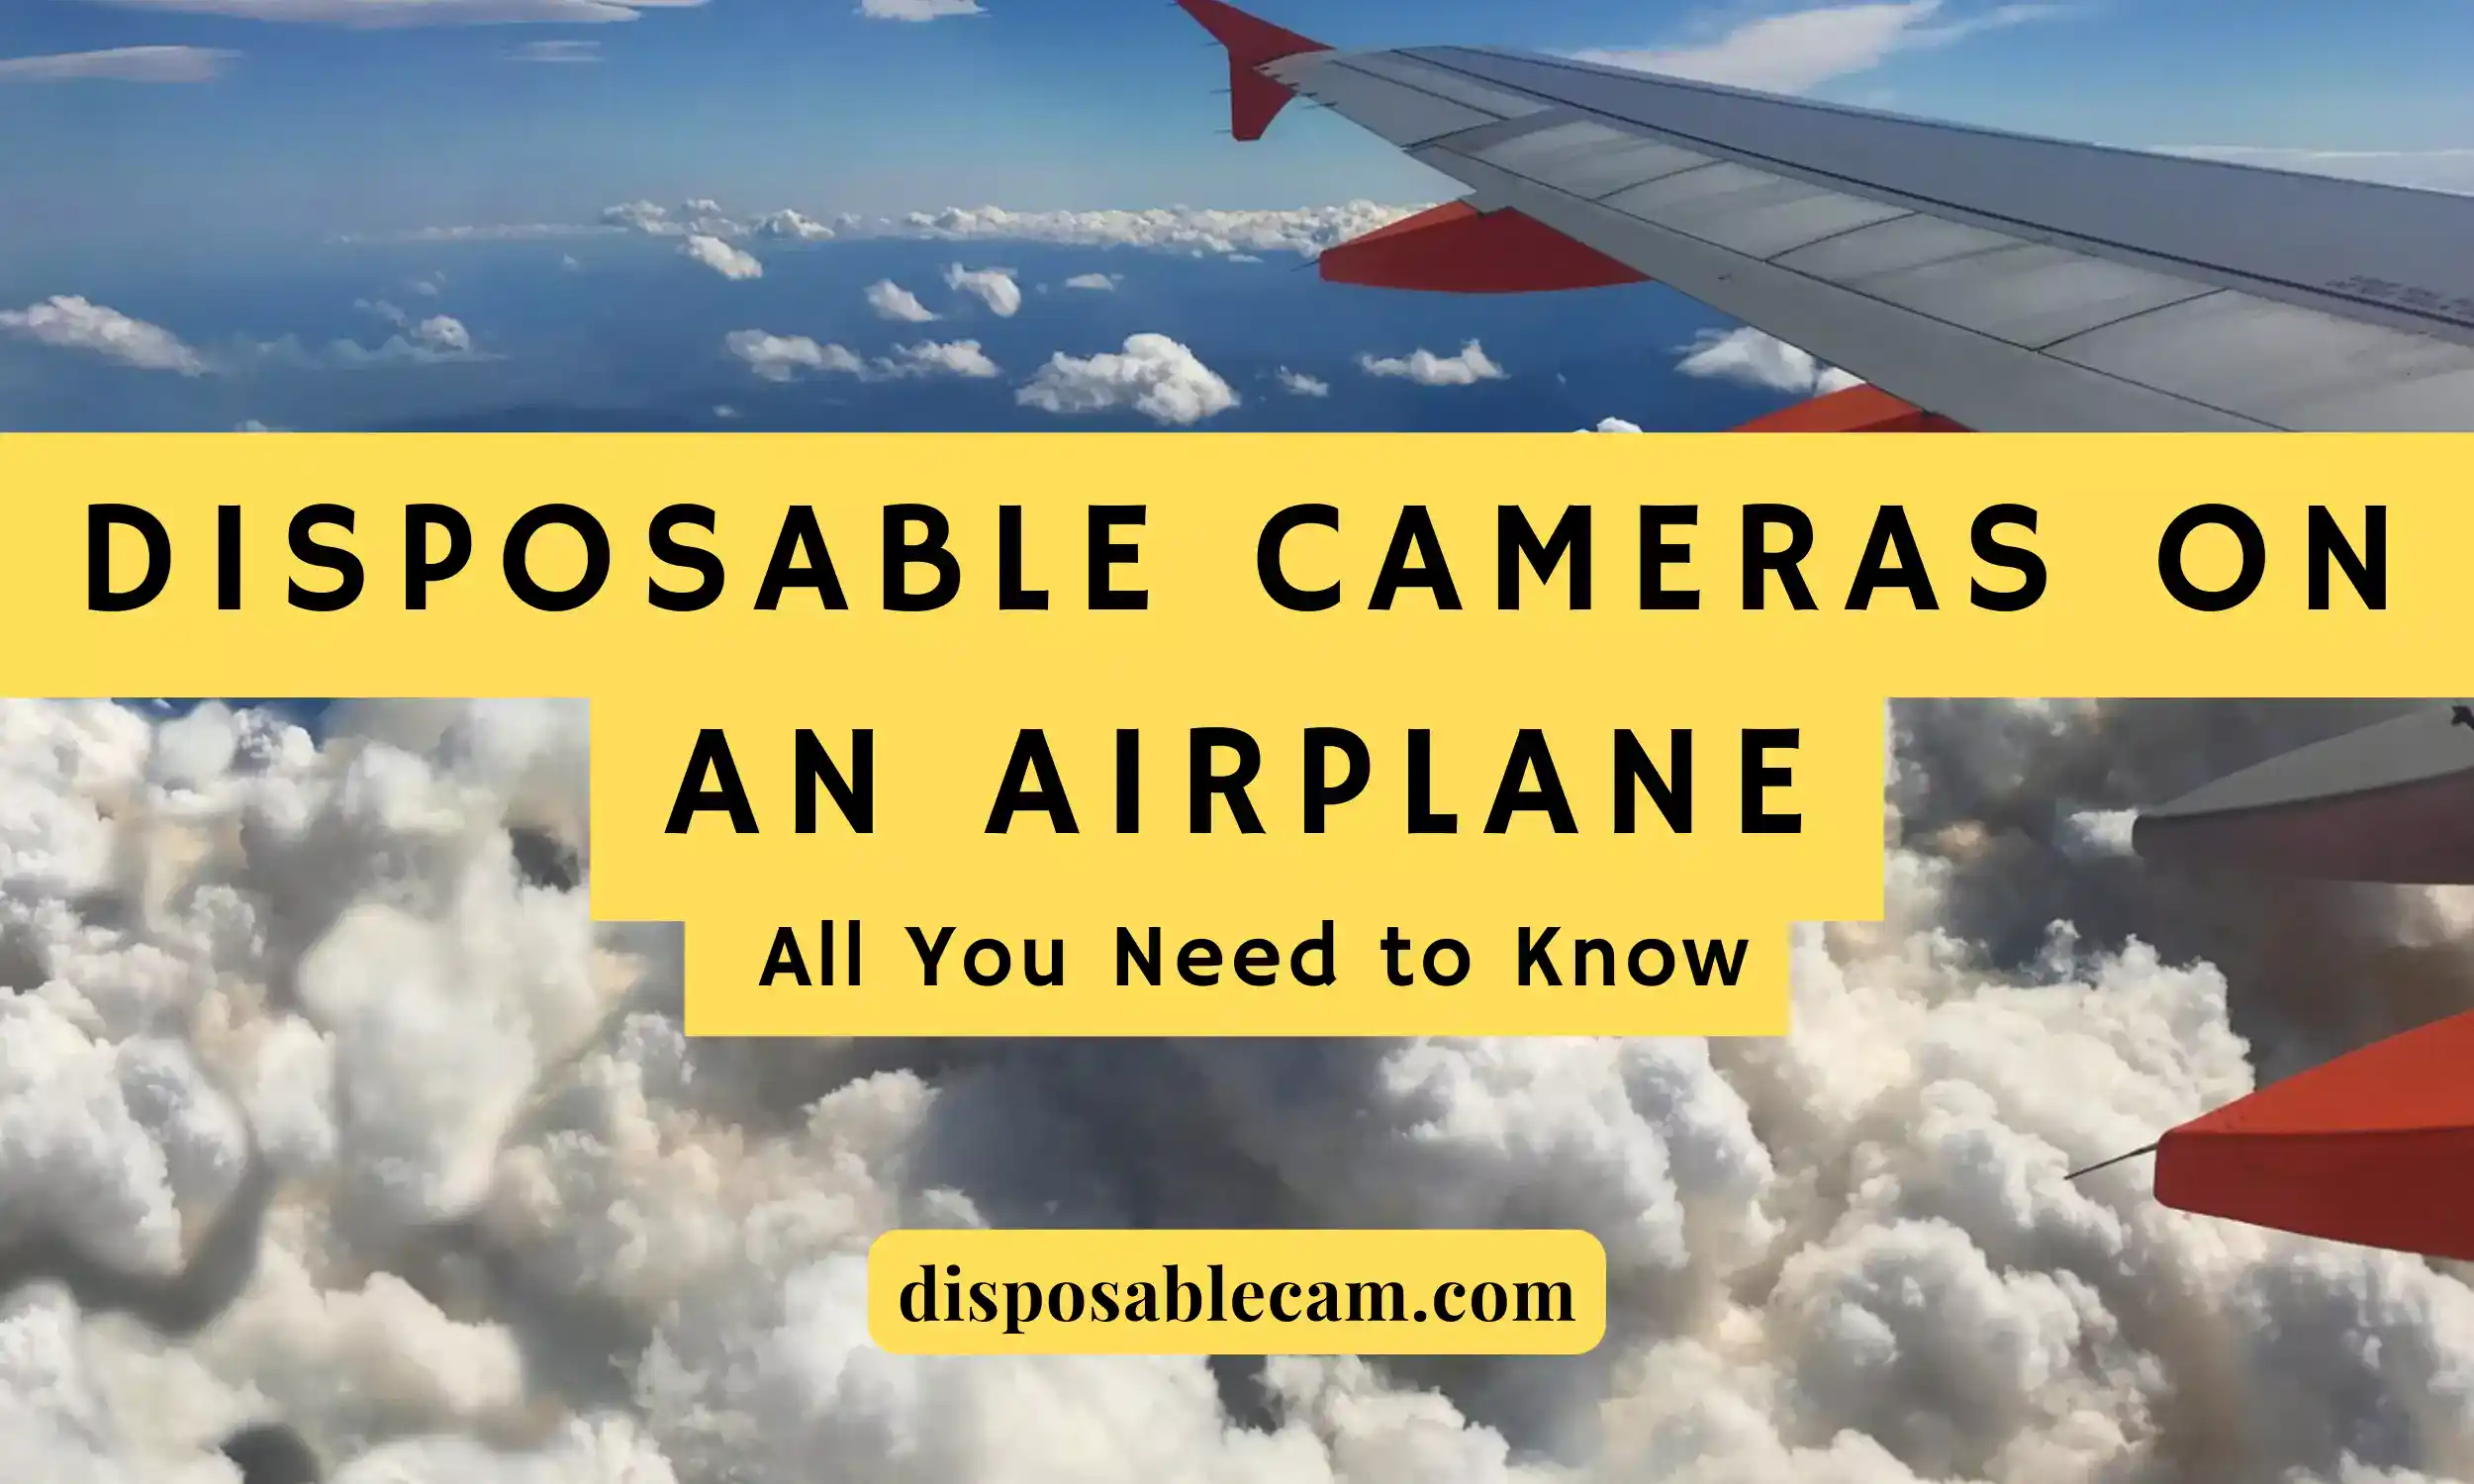 All you need to know about bringing disposable cameras on an airplane